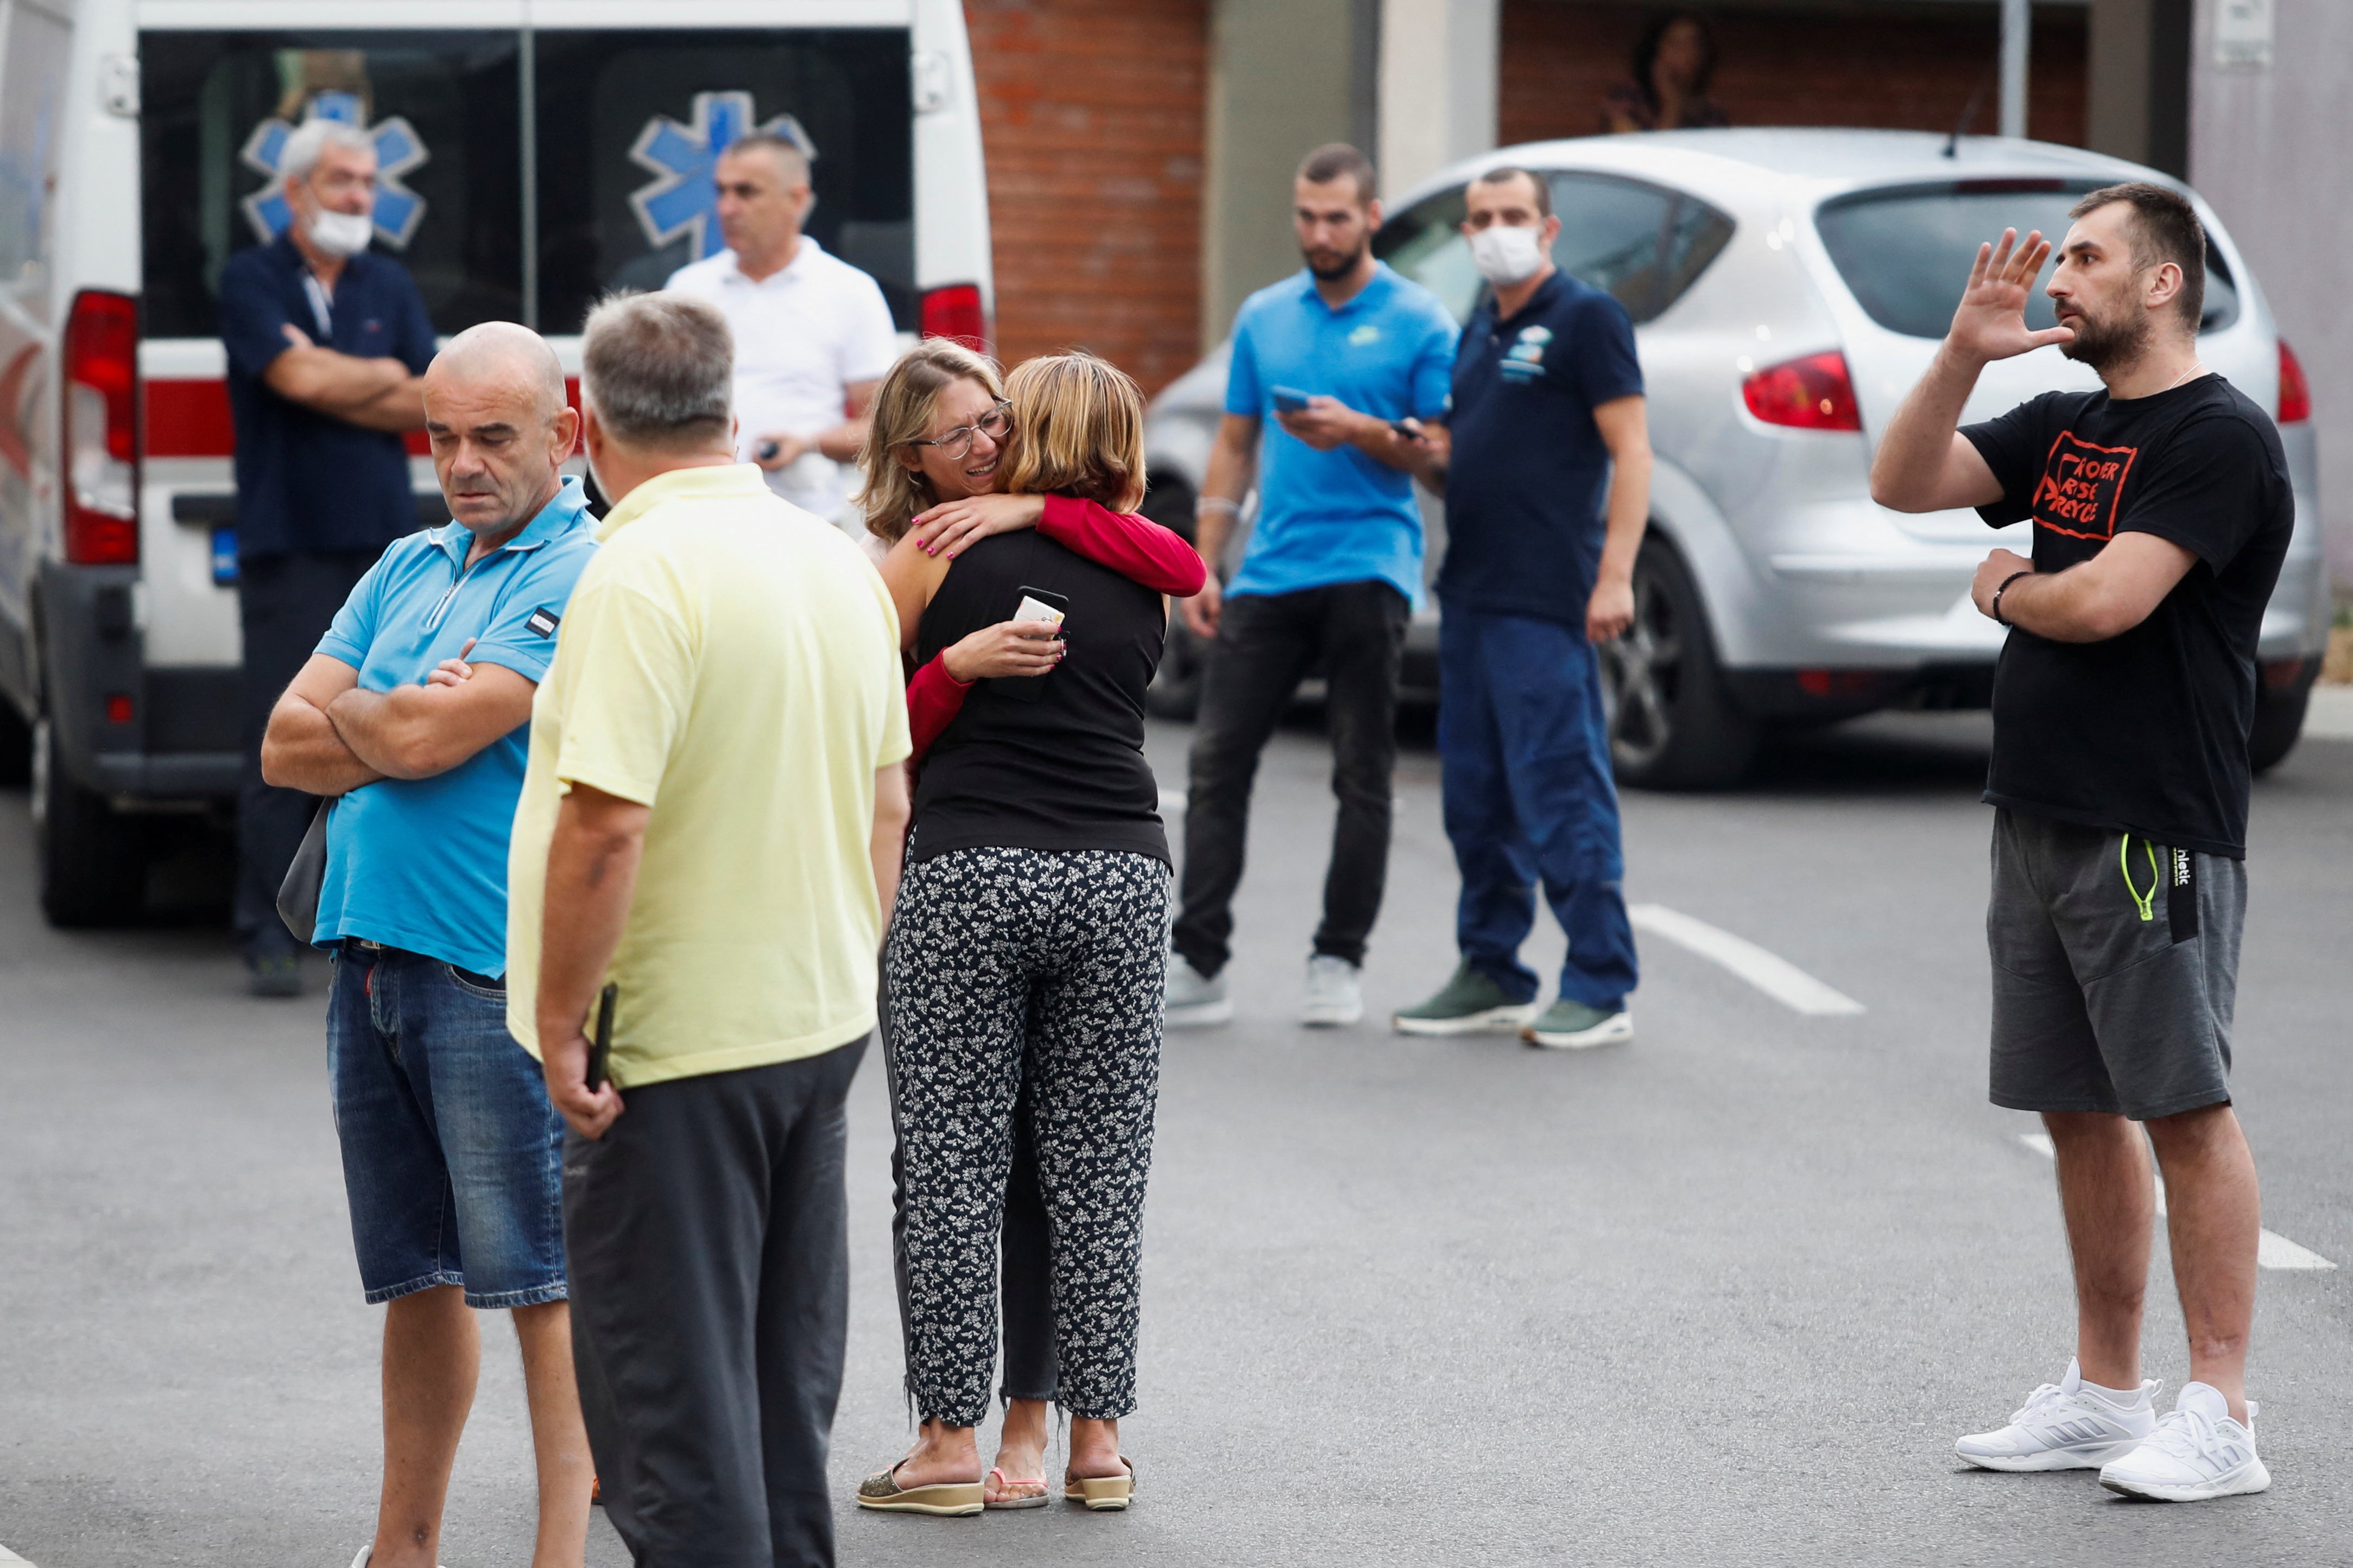 Relatives of victims wait in front of a city hospital after the shooting